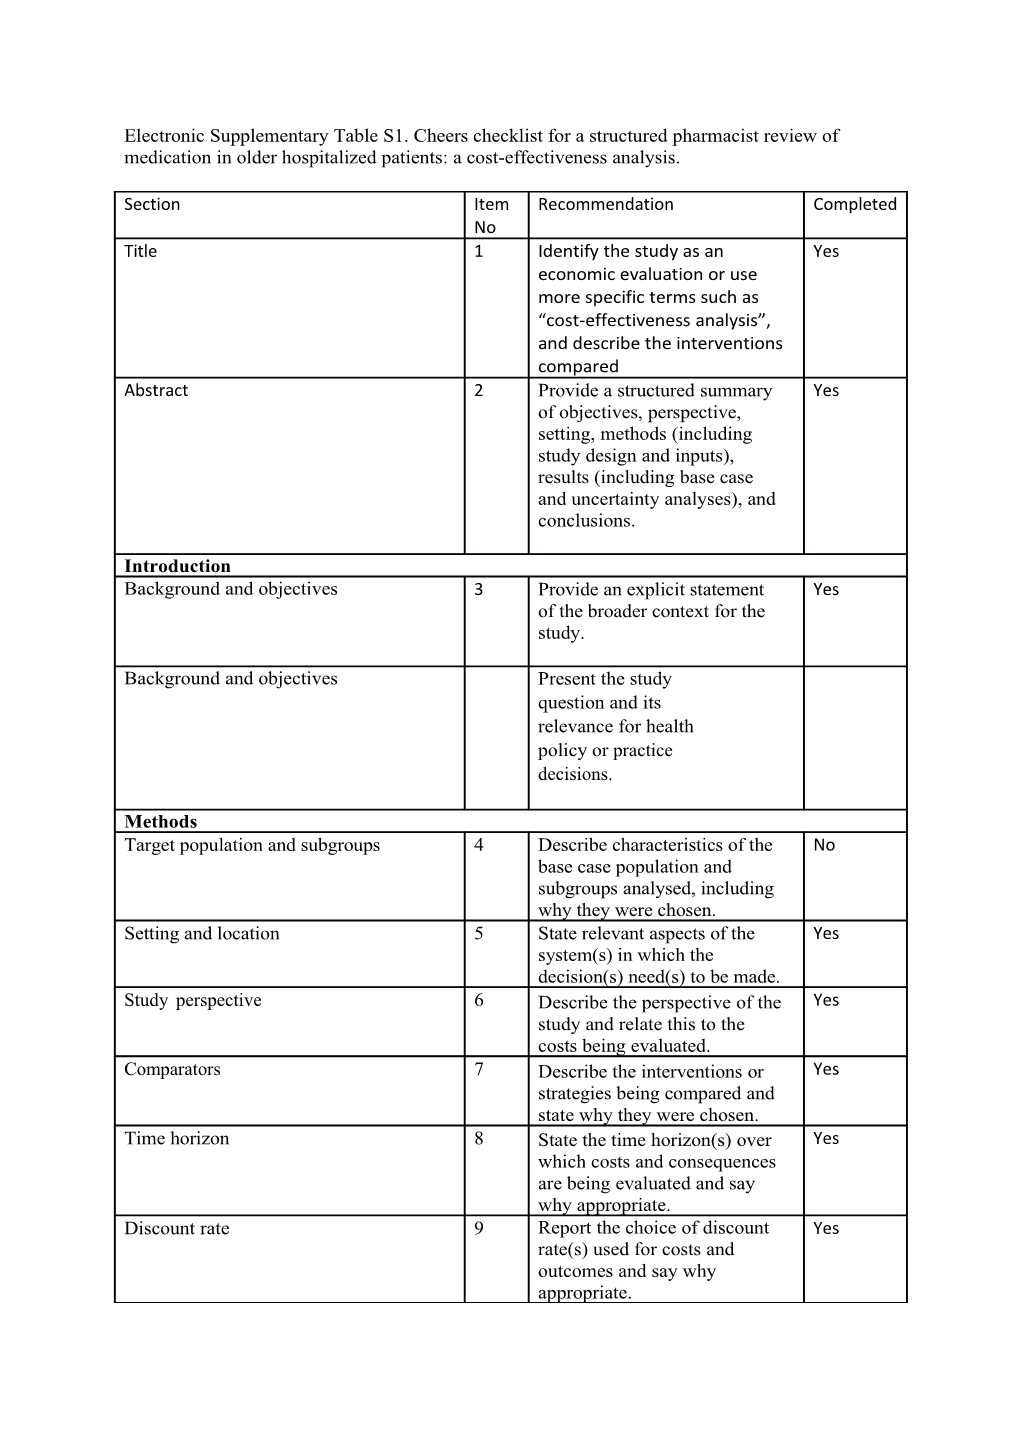 Electronic Supplementary Table S1. Cheers Checklist for a Structured Pharmacist Review